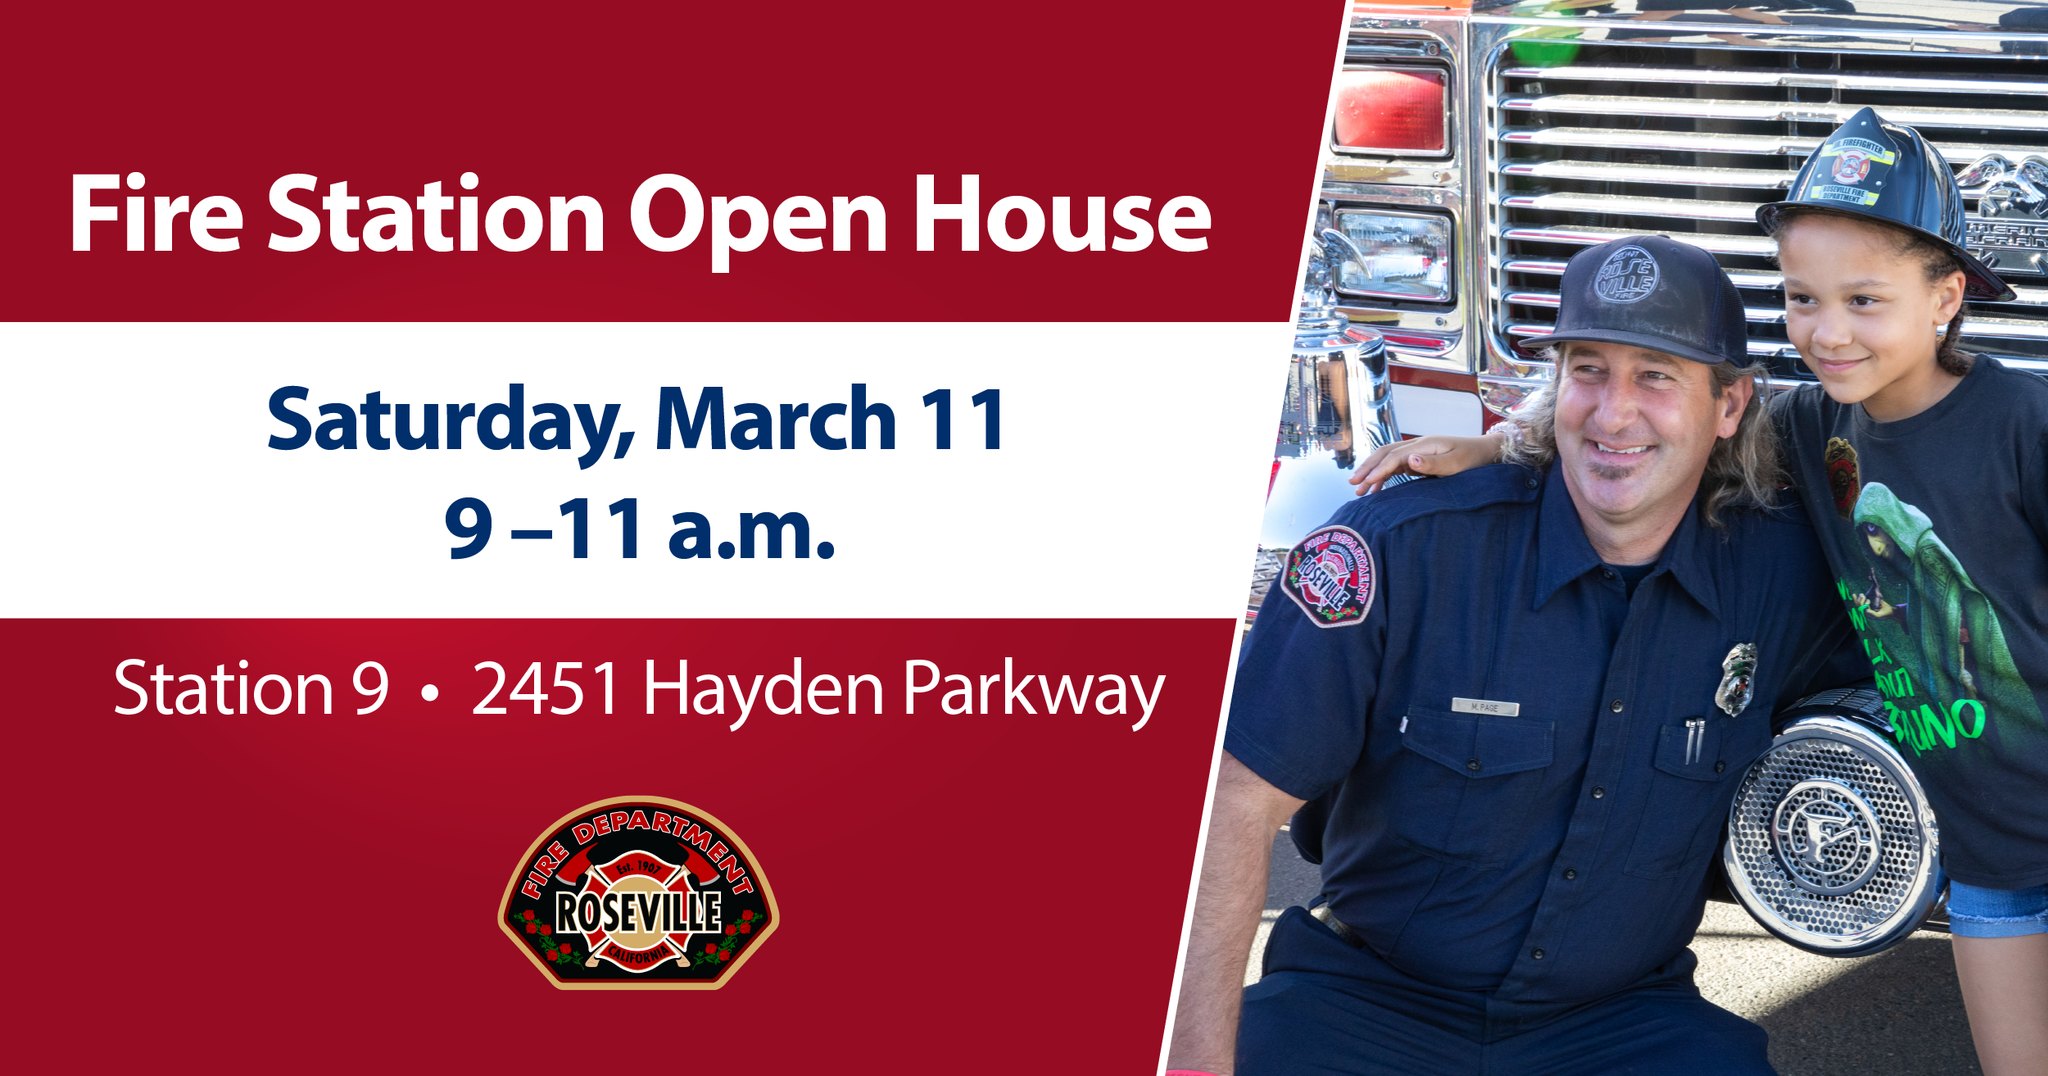 More information about "Fire Station 9 - Open House - March 11"